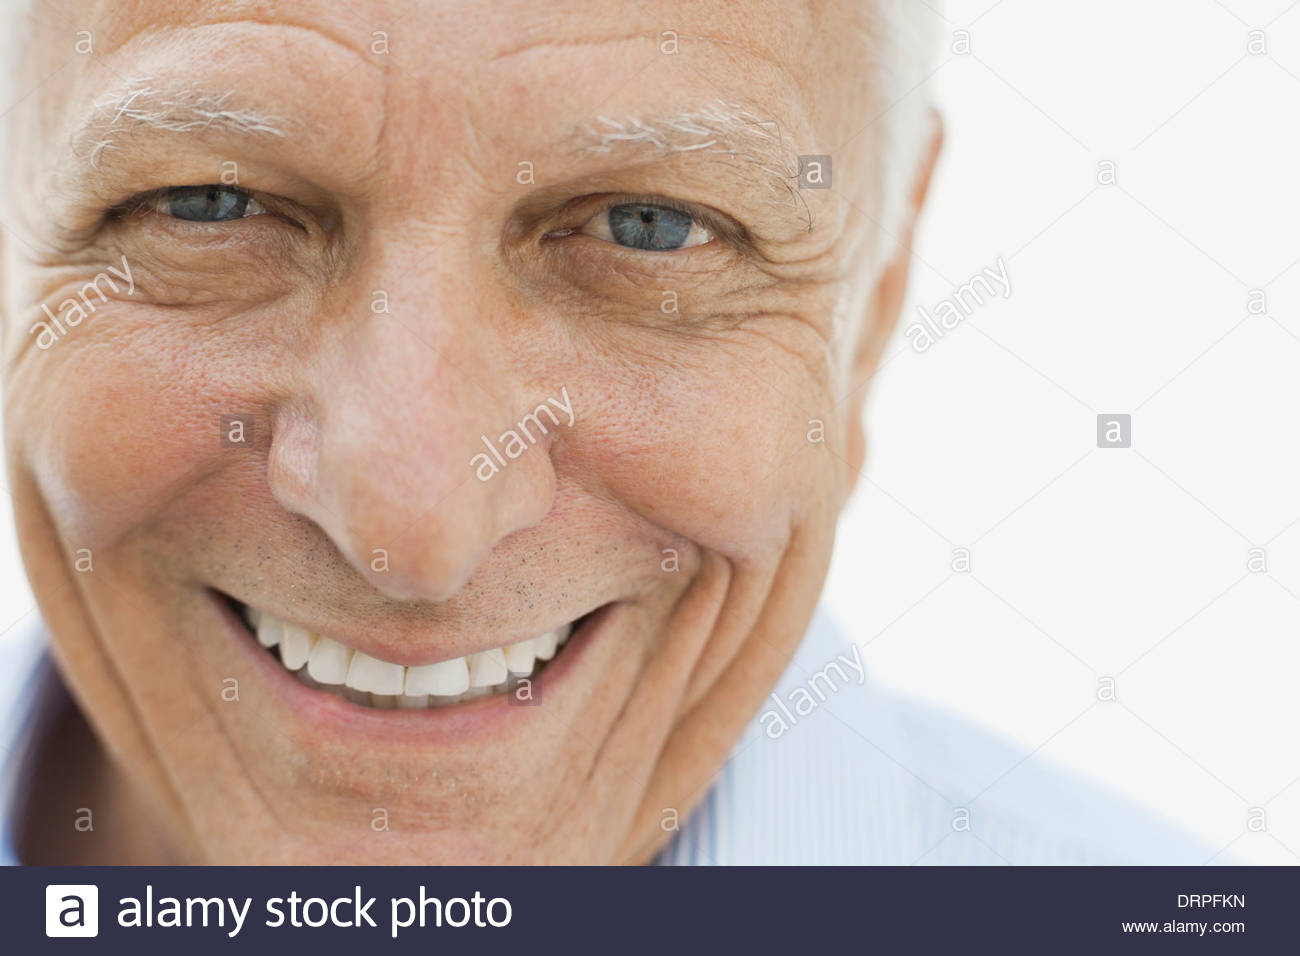 Close-up portrait of smiling man Stock Photo